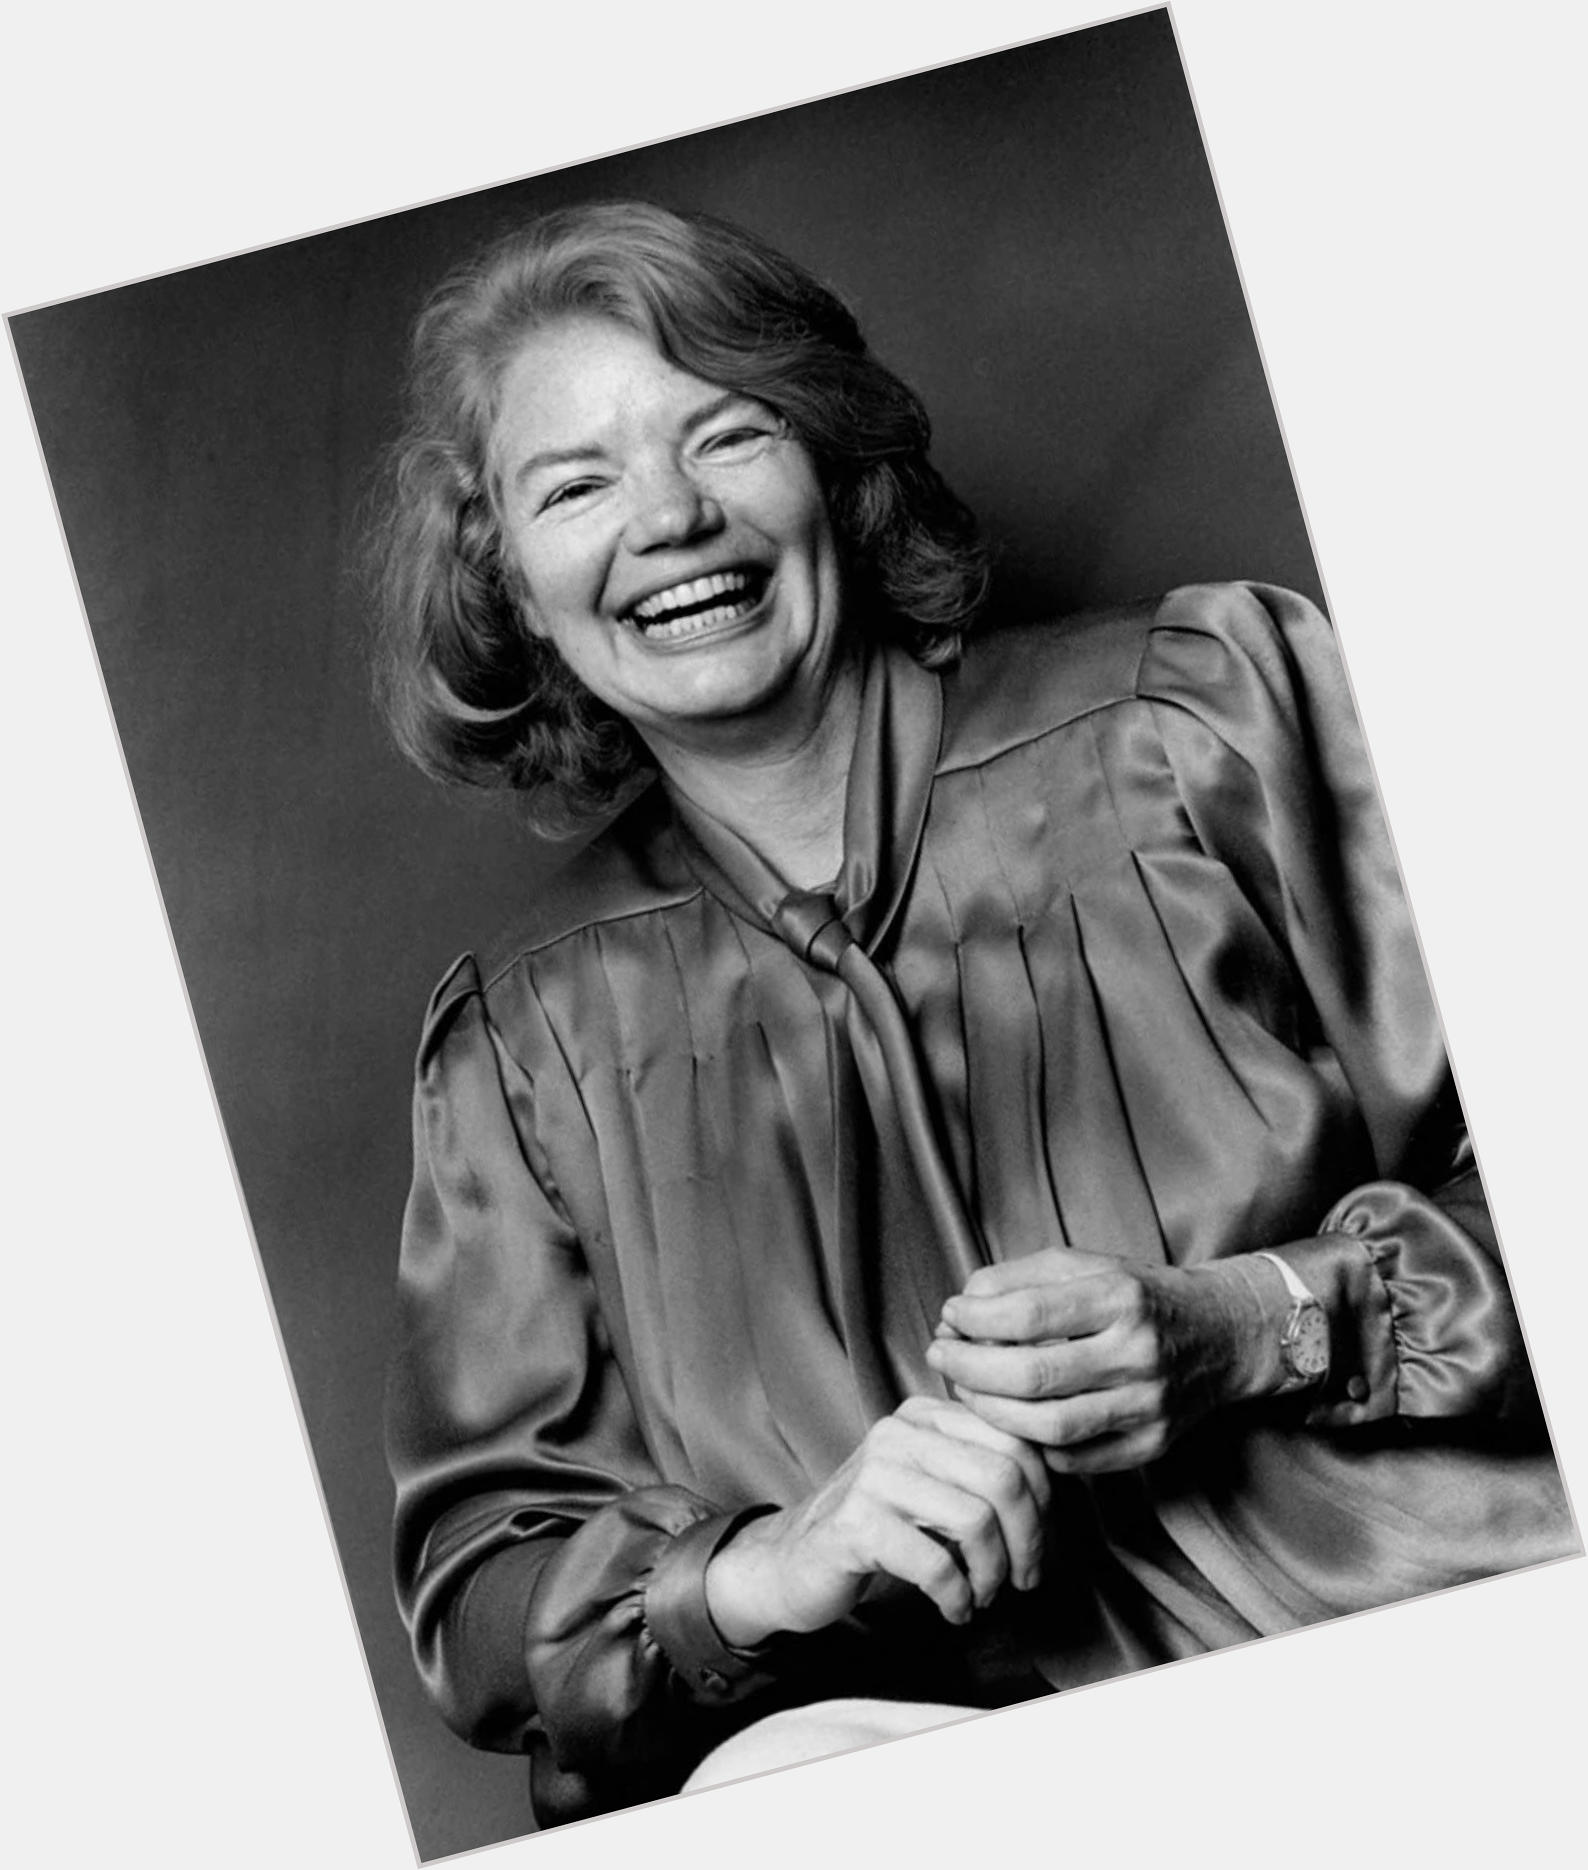 Https://fanpagepress.net/m/M/Molly Ivins New Pic 1